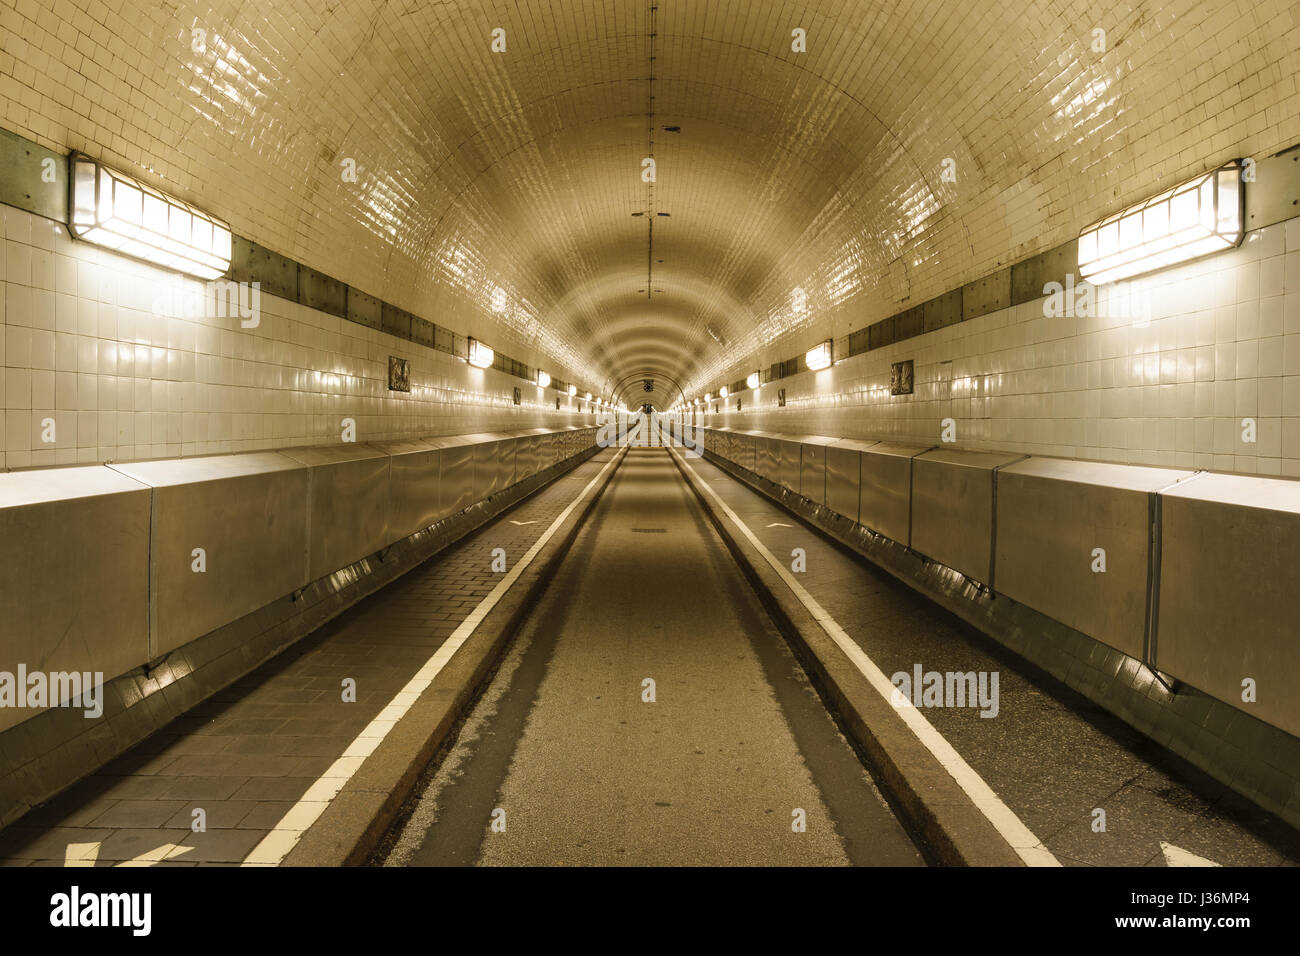 Straight view into the old St. Pauli Elbe Tunnel in Hamburg, Germany. Stock Photo